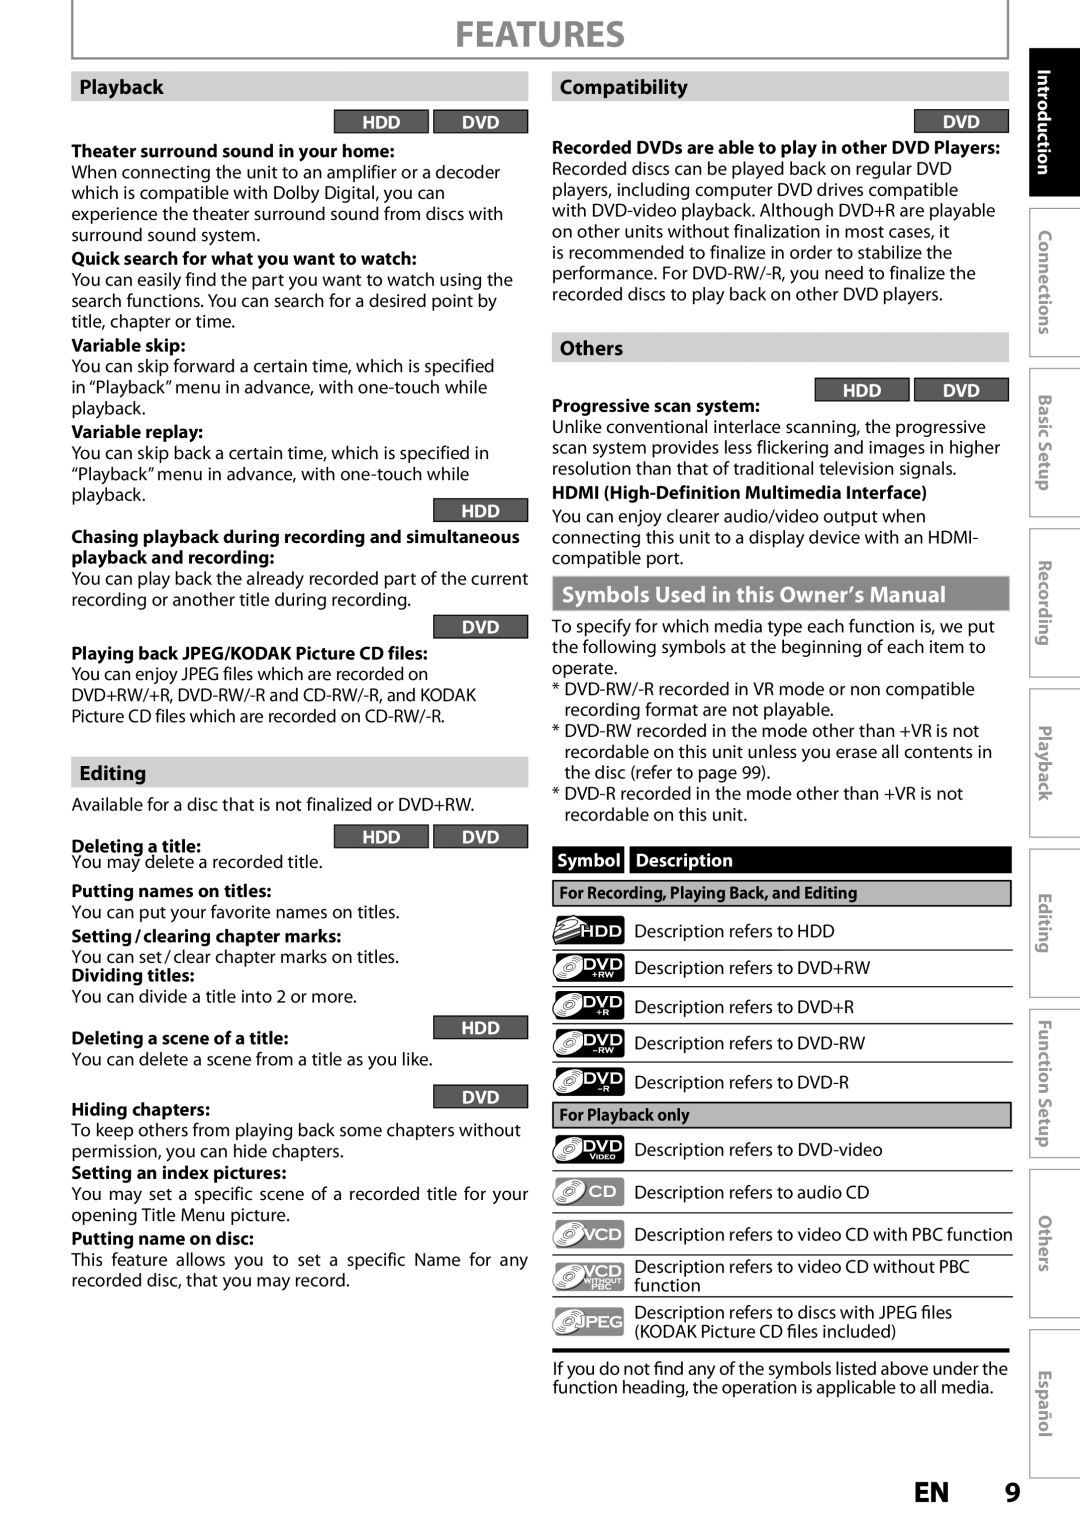 Magnavox MDR533H Features, Symbols Used in this Owner’s Manual, Playback, Editing, Compatibility, Others, Hdd Dvd, Español 